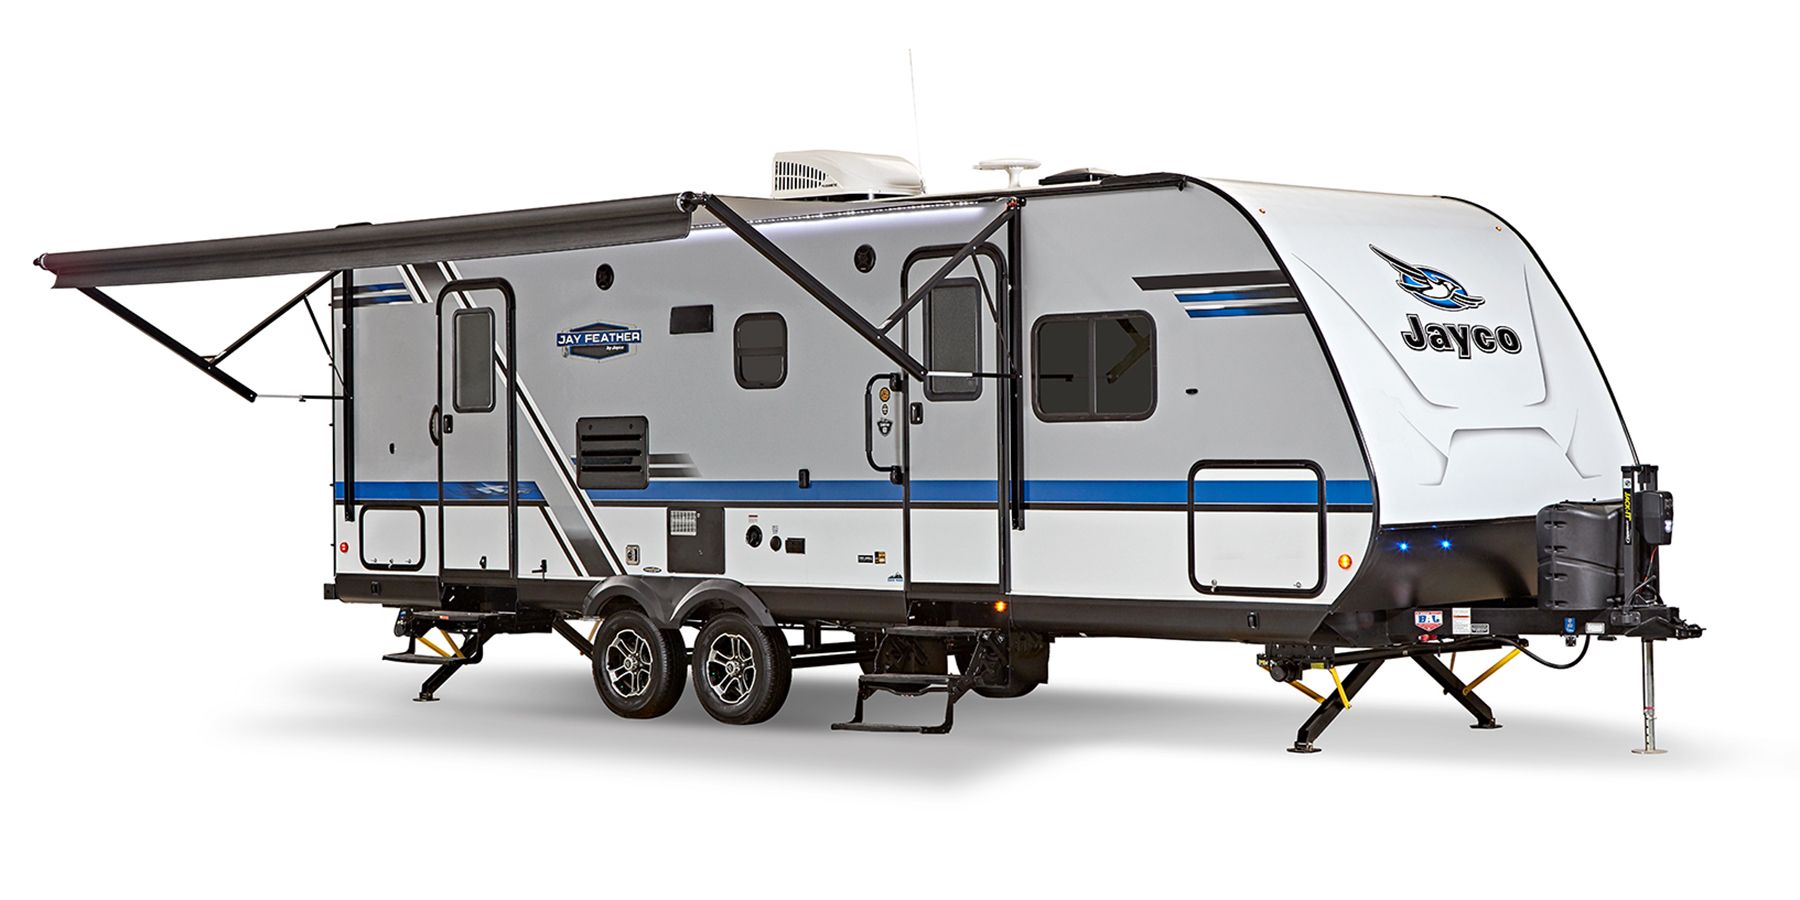 6 Most Popular Travel Trailer Brands (With Pictures)